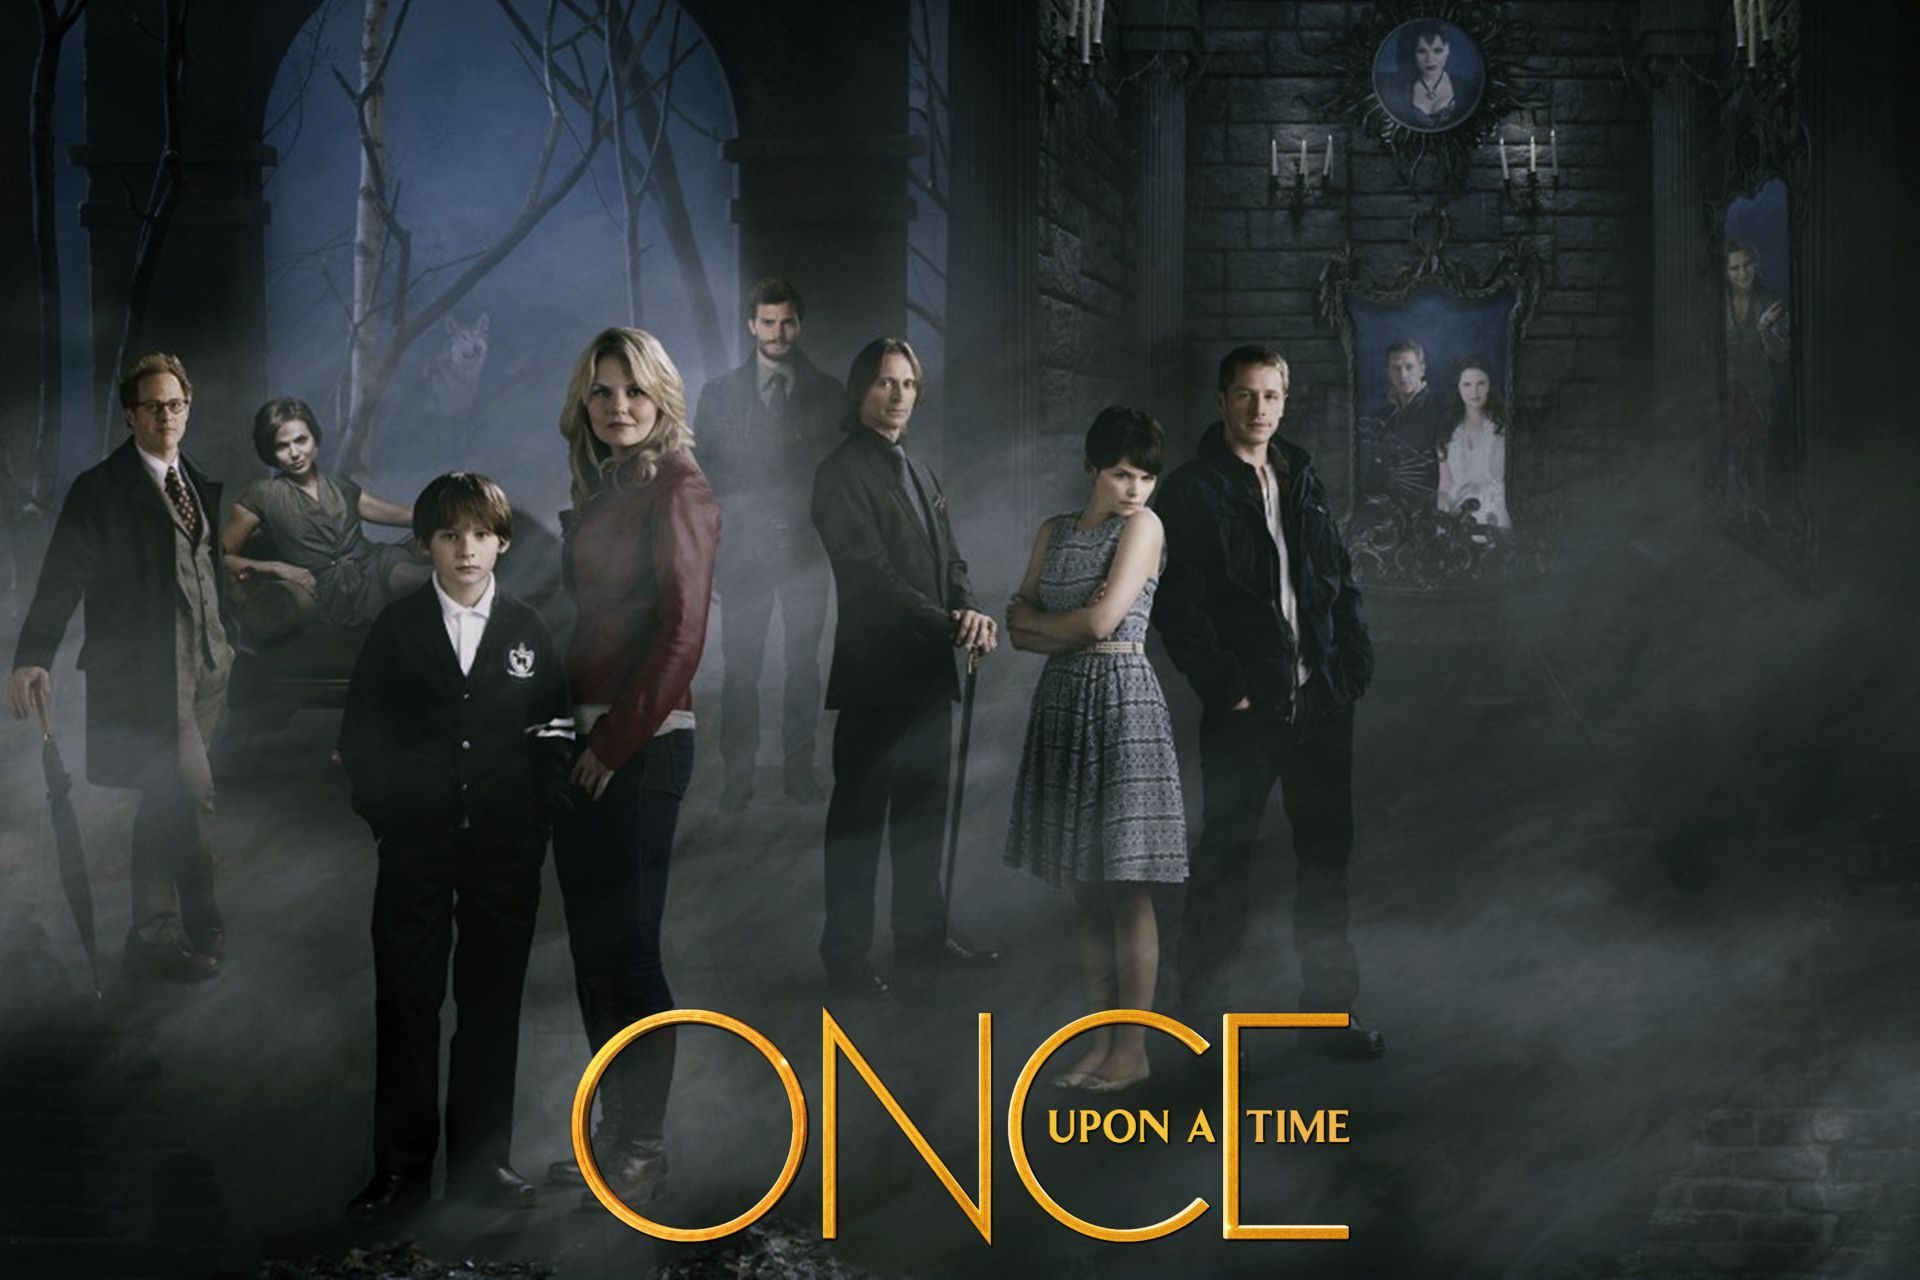 1920x1280 49+] Once Upon a Time Wallpaper